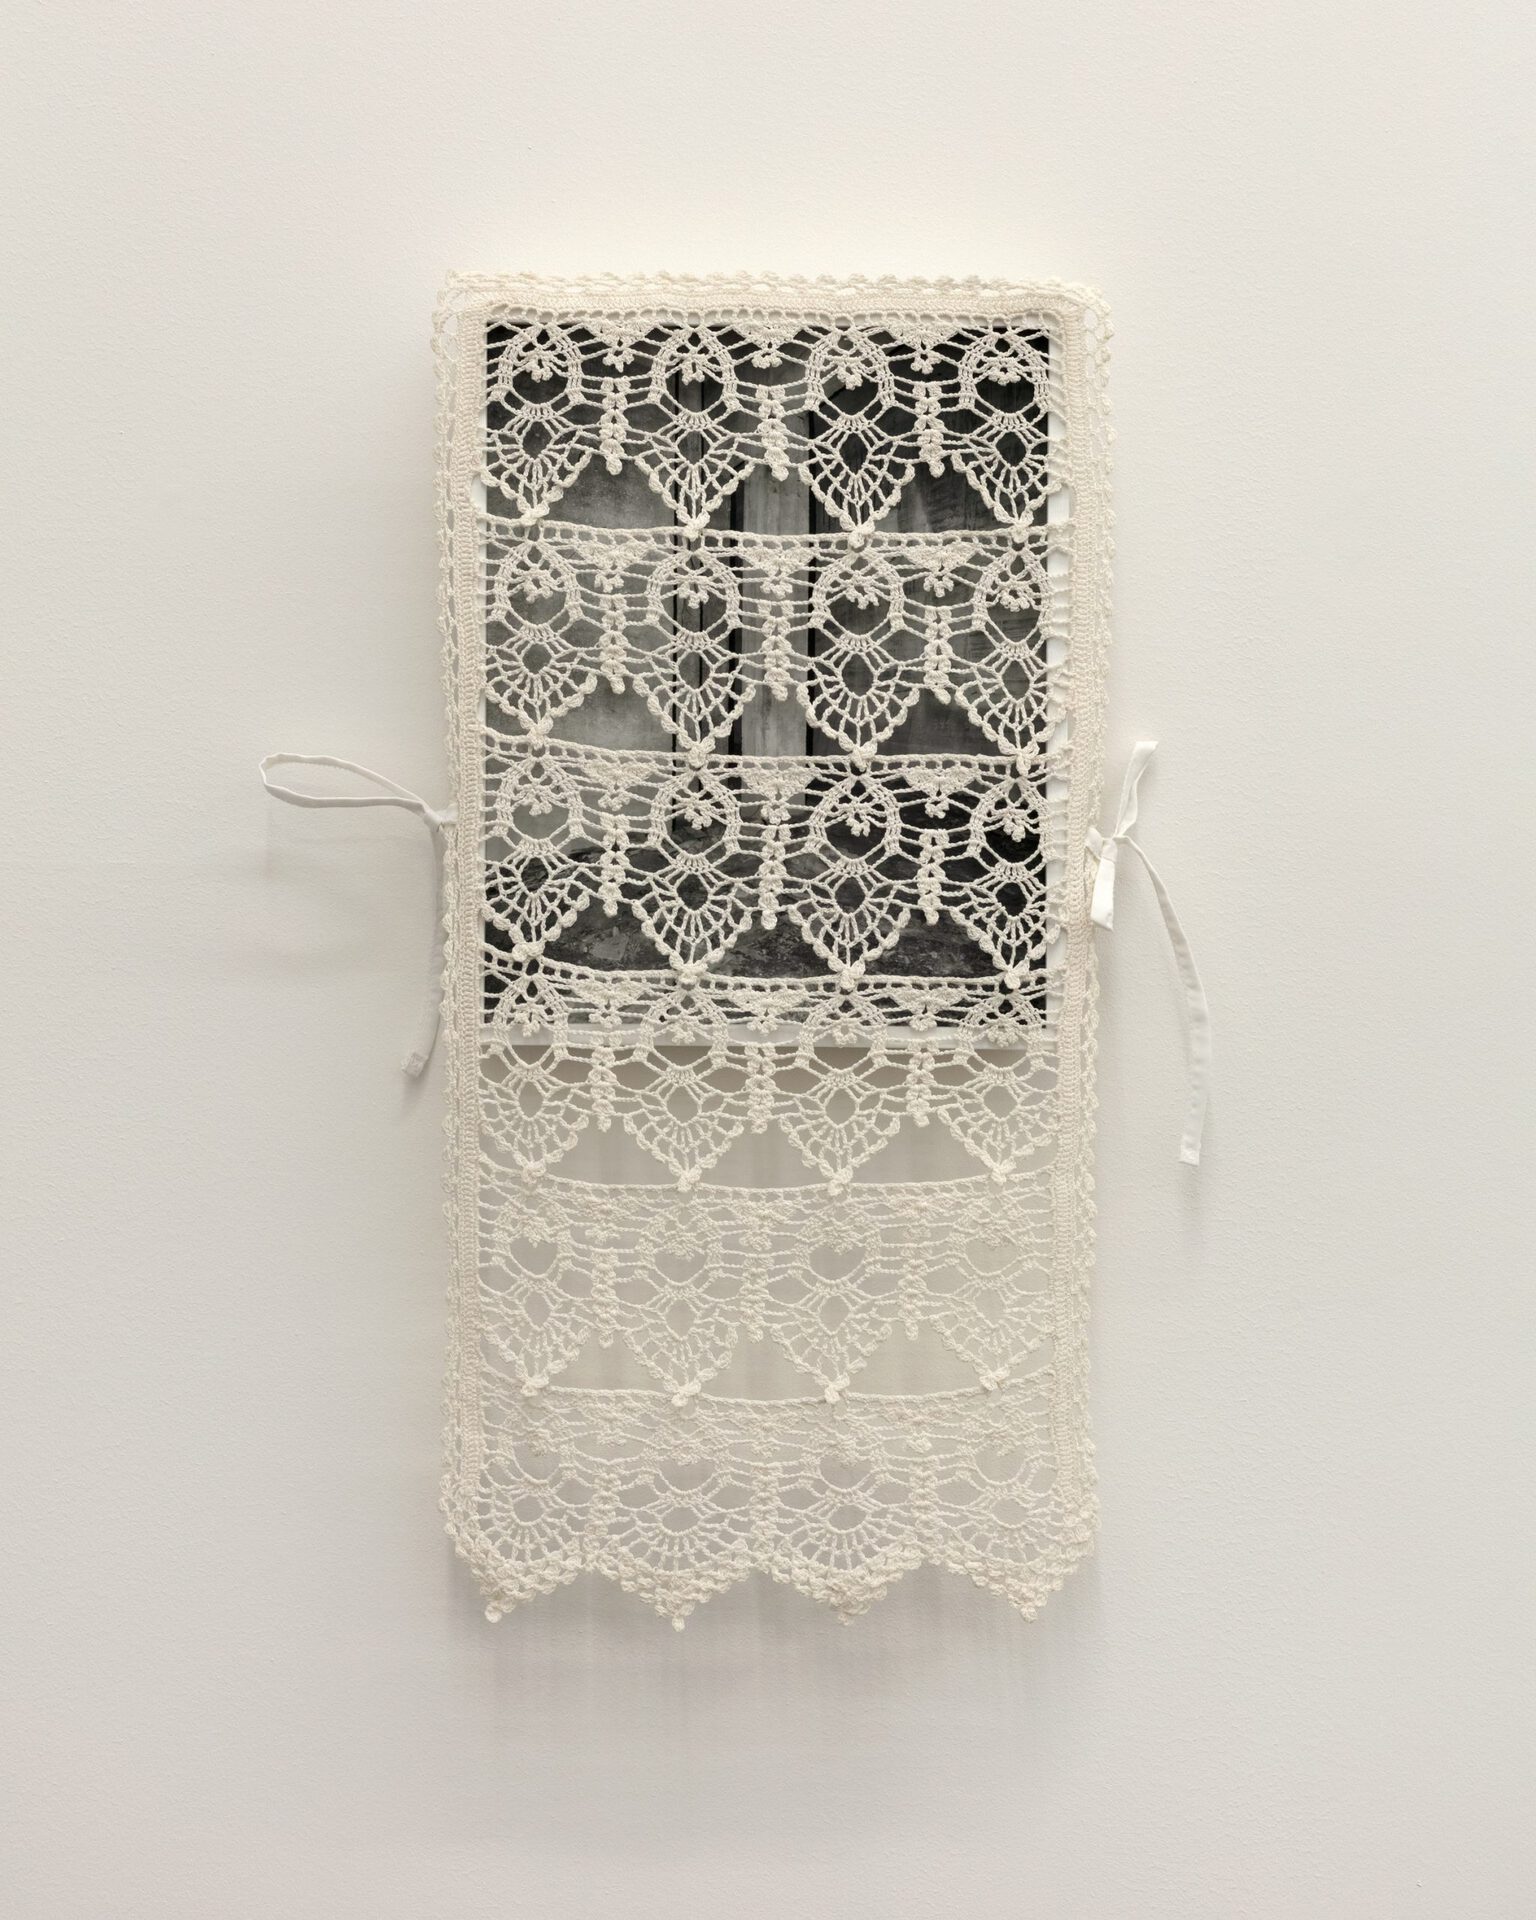 Anna Orłowska, Foundation, 2022, Gelatine silver print, mounted on cardboard, ivory wooden frame, museum glass, cotton crochet, polyester, unique, 37 x 30 cm